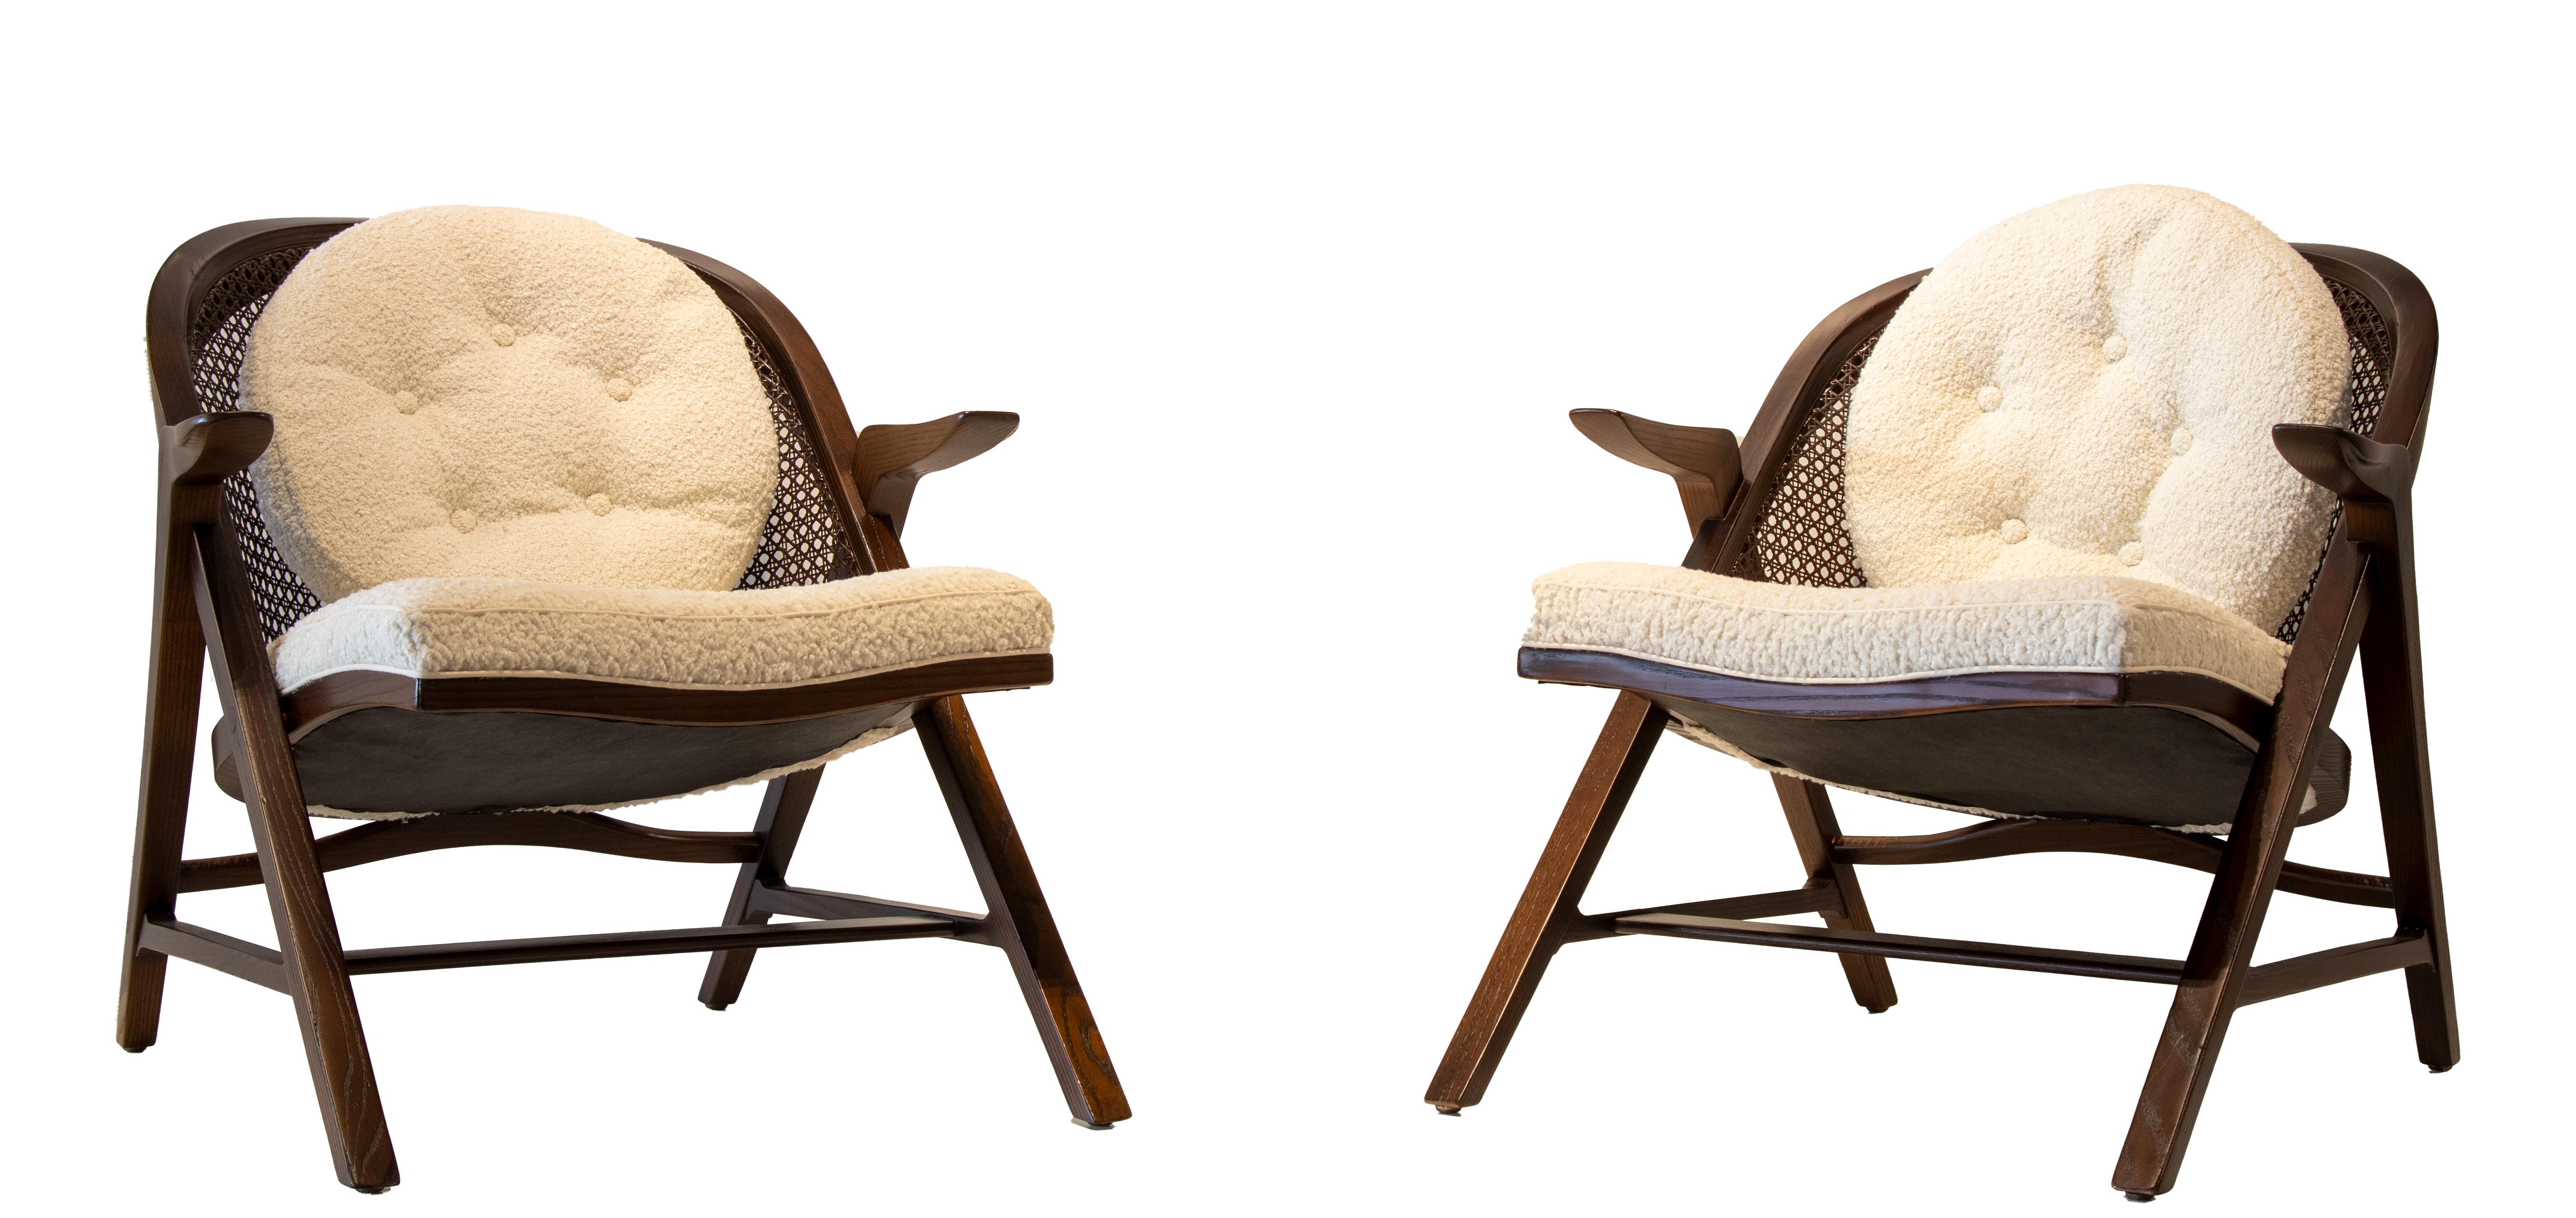 Mid-Century Modern Pair of 1950s Edward Wormley for Dunbar Cane back Chairs model 5700a For Sale